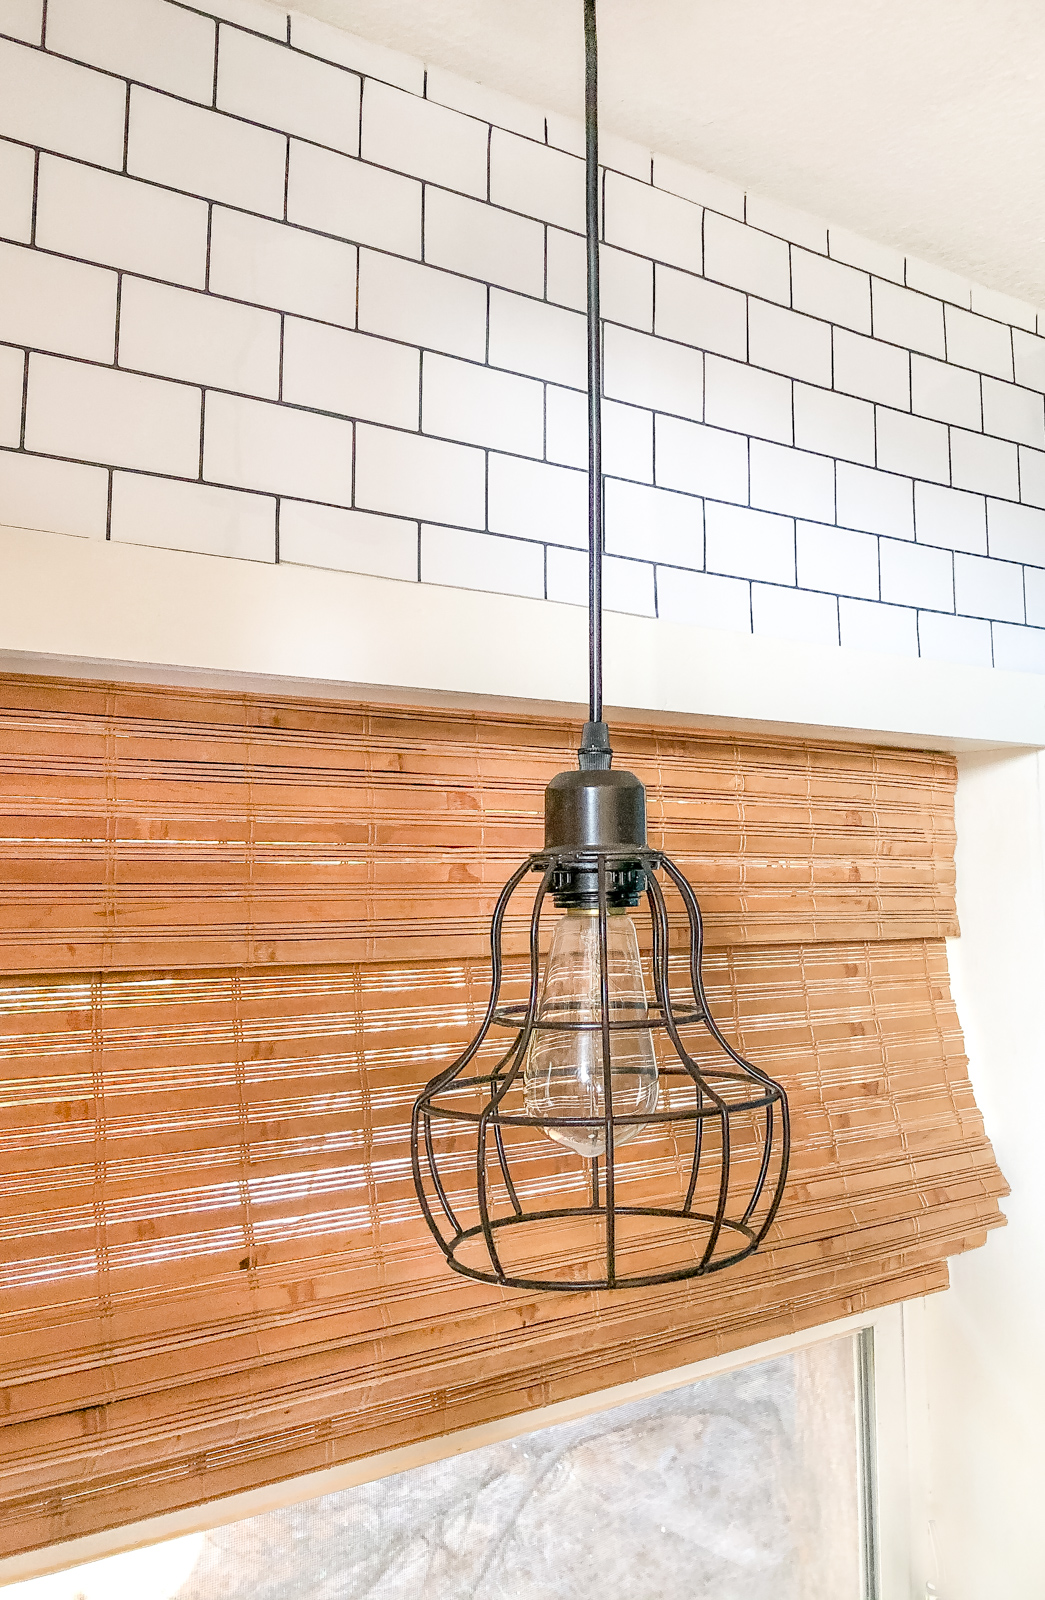 Peel and stick subway tile